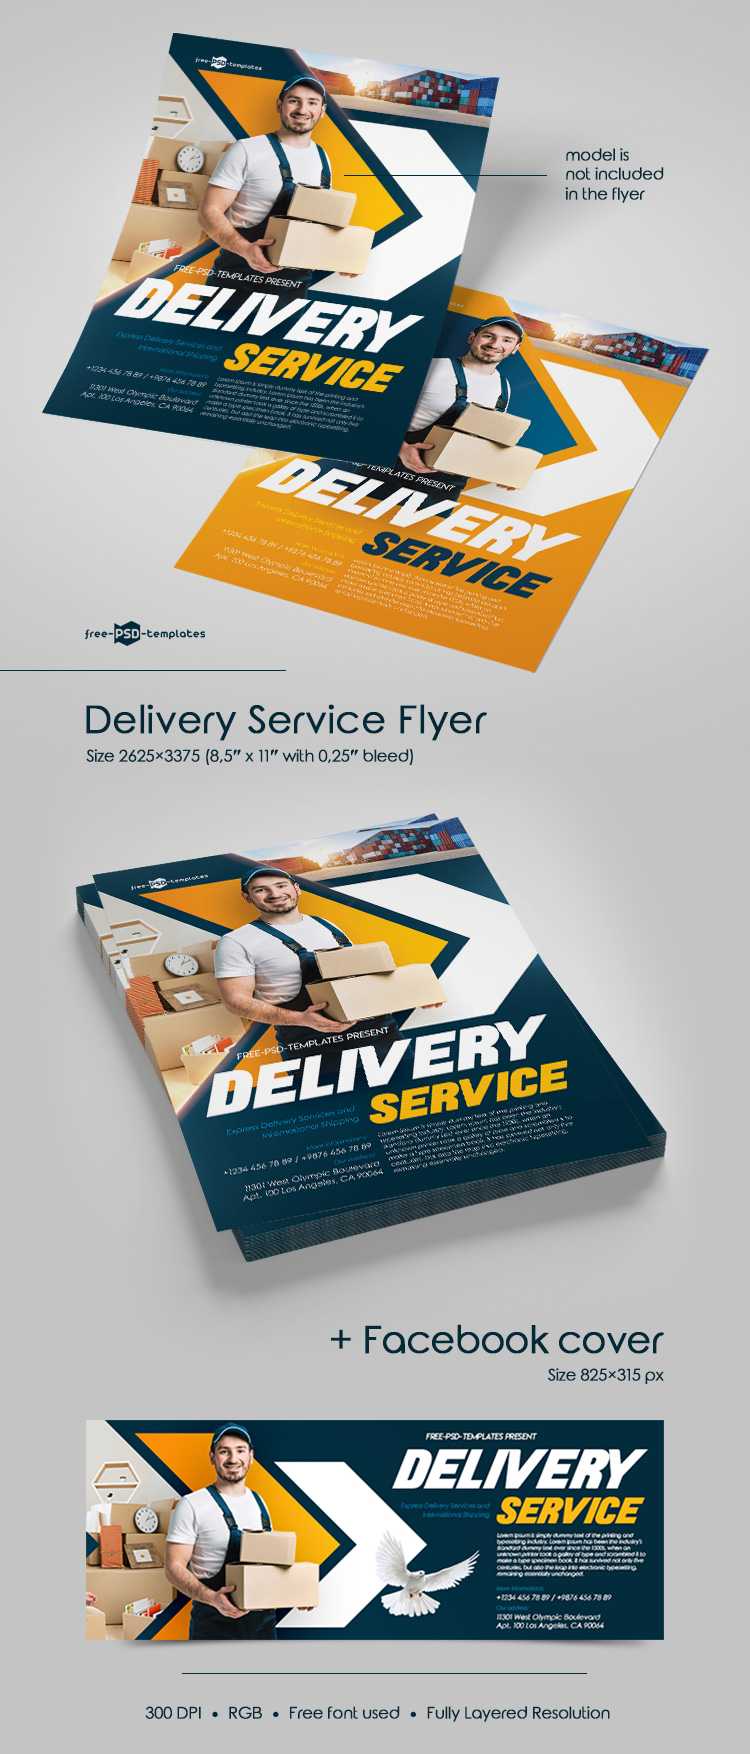 Free Delivery Service Flyer In Psd | Free Psd Templates Intended For Flyer Design Templates Psd Free Download